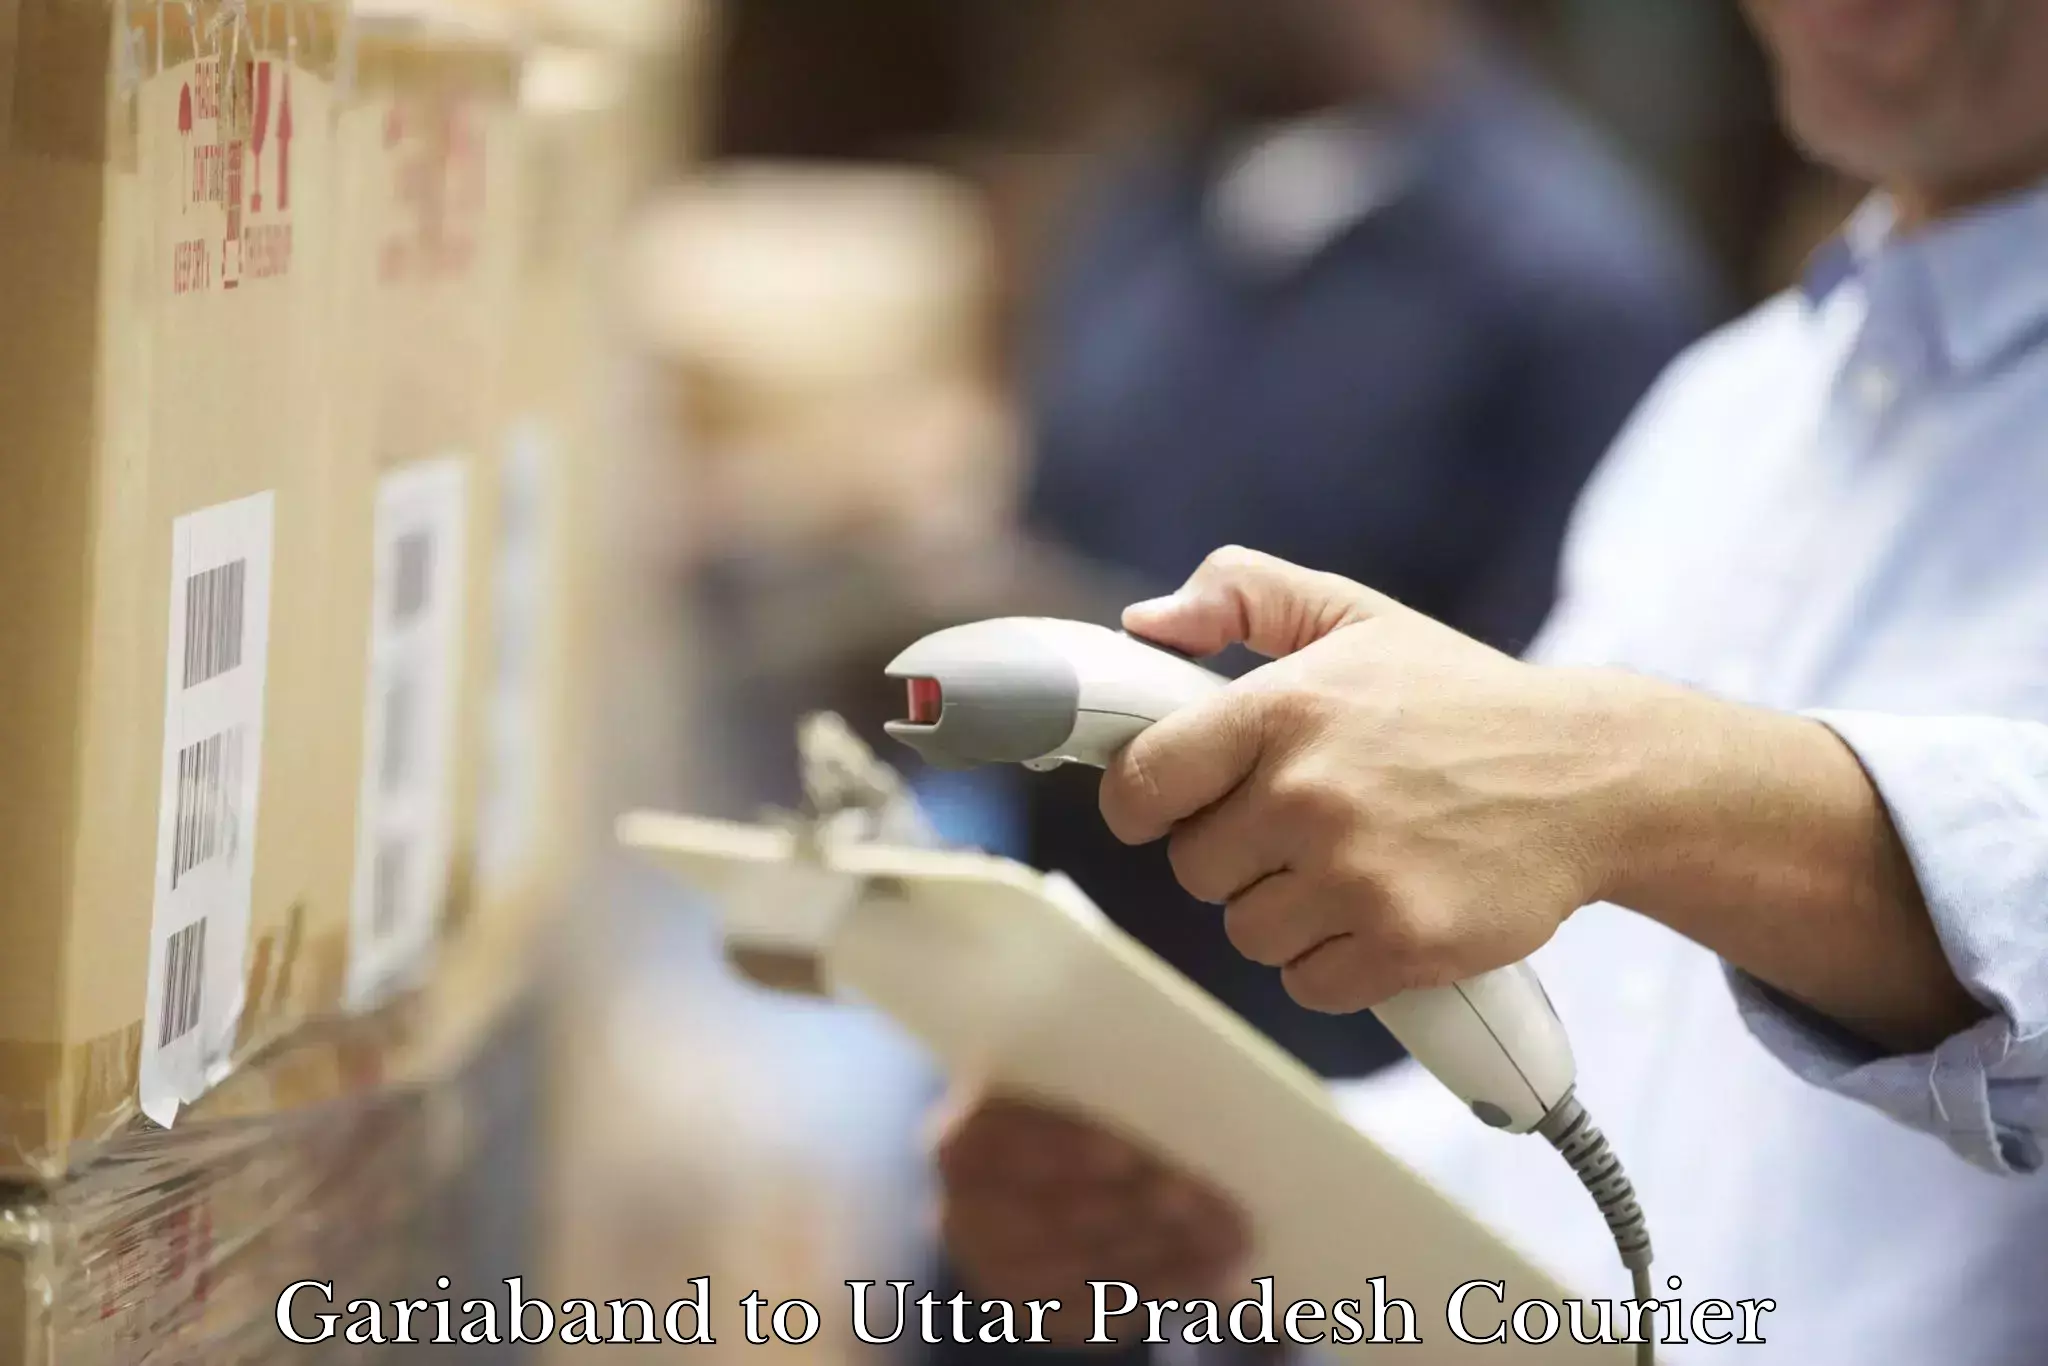 Professional courier handling Gariaband to Soraon